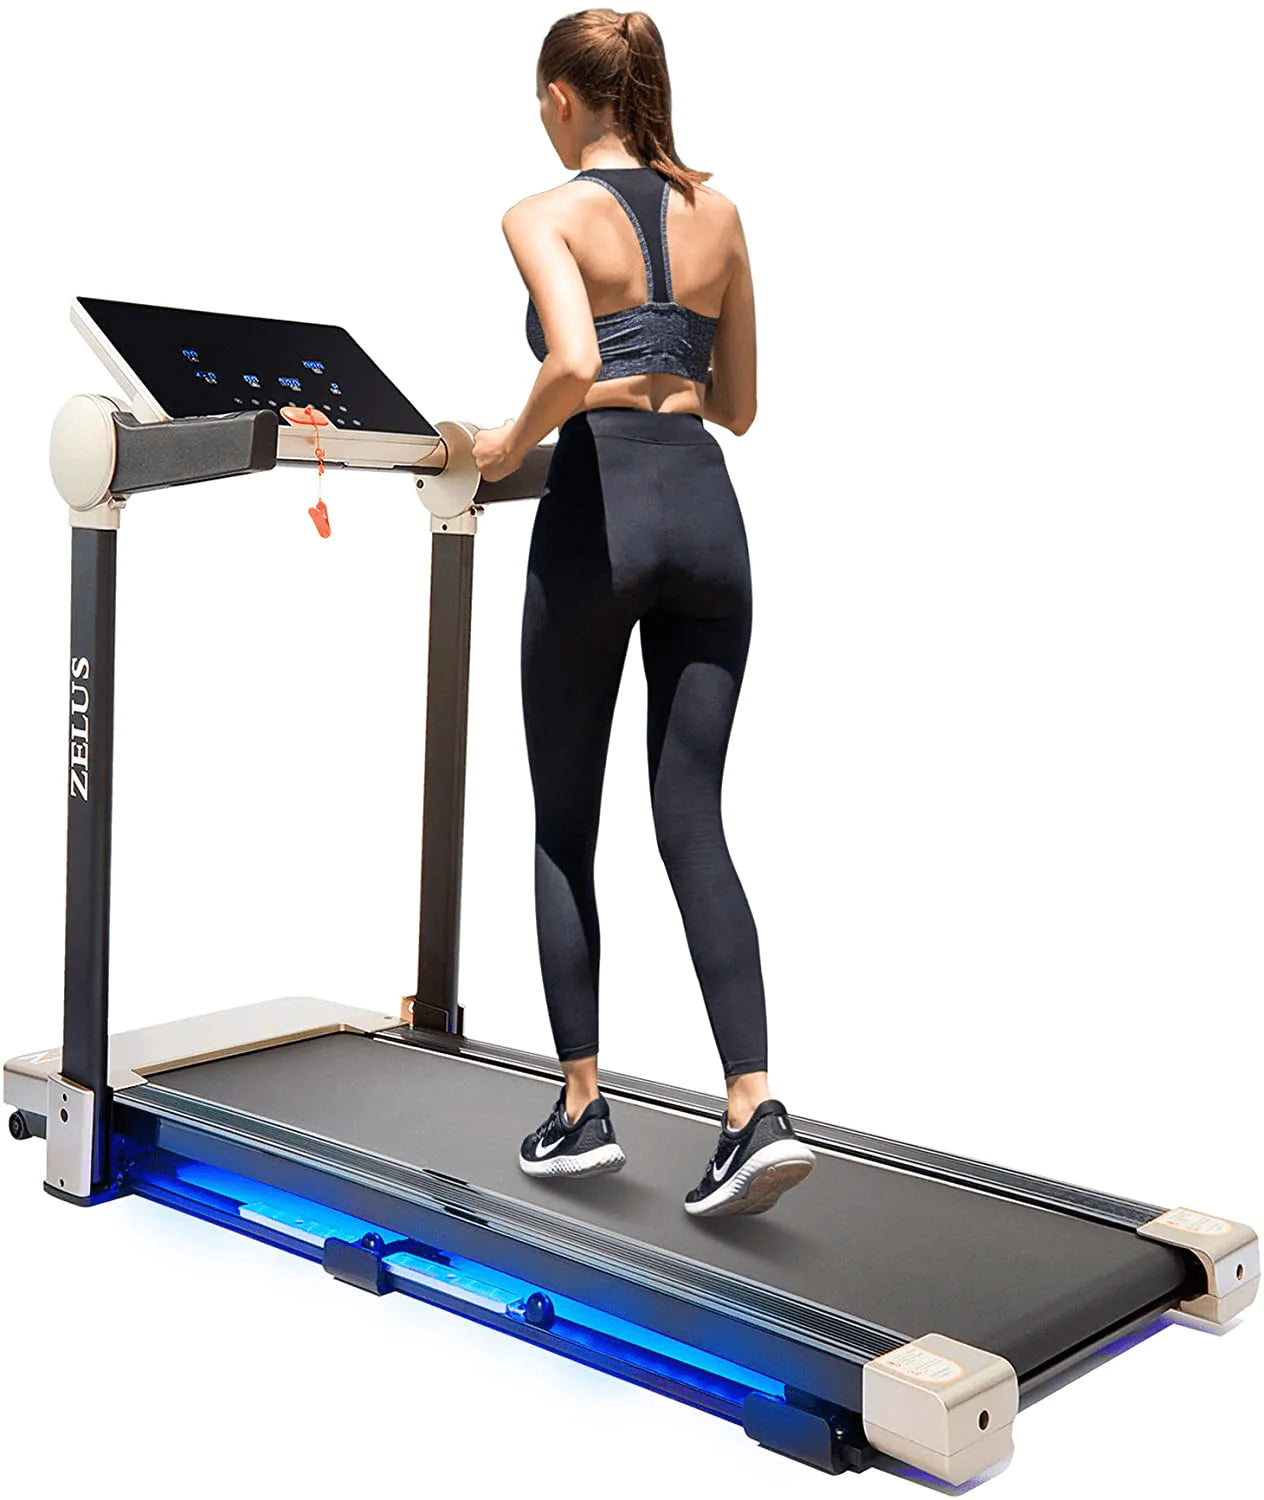 ZELUS 3HP Folding Treadmill for Home or Office | Home Gym Exercise Equipment up to 7.5Mph Cardio Training with Free Sports App, Bluetooth Speaker, Heart Rate Monitor, Magnetic Shock Absorption Animals & Pet Supplies > Pet Supplies > Dog Supplies > Dog Treadmills Z ZELUS   